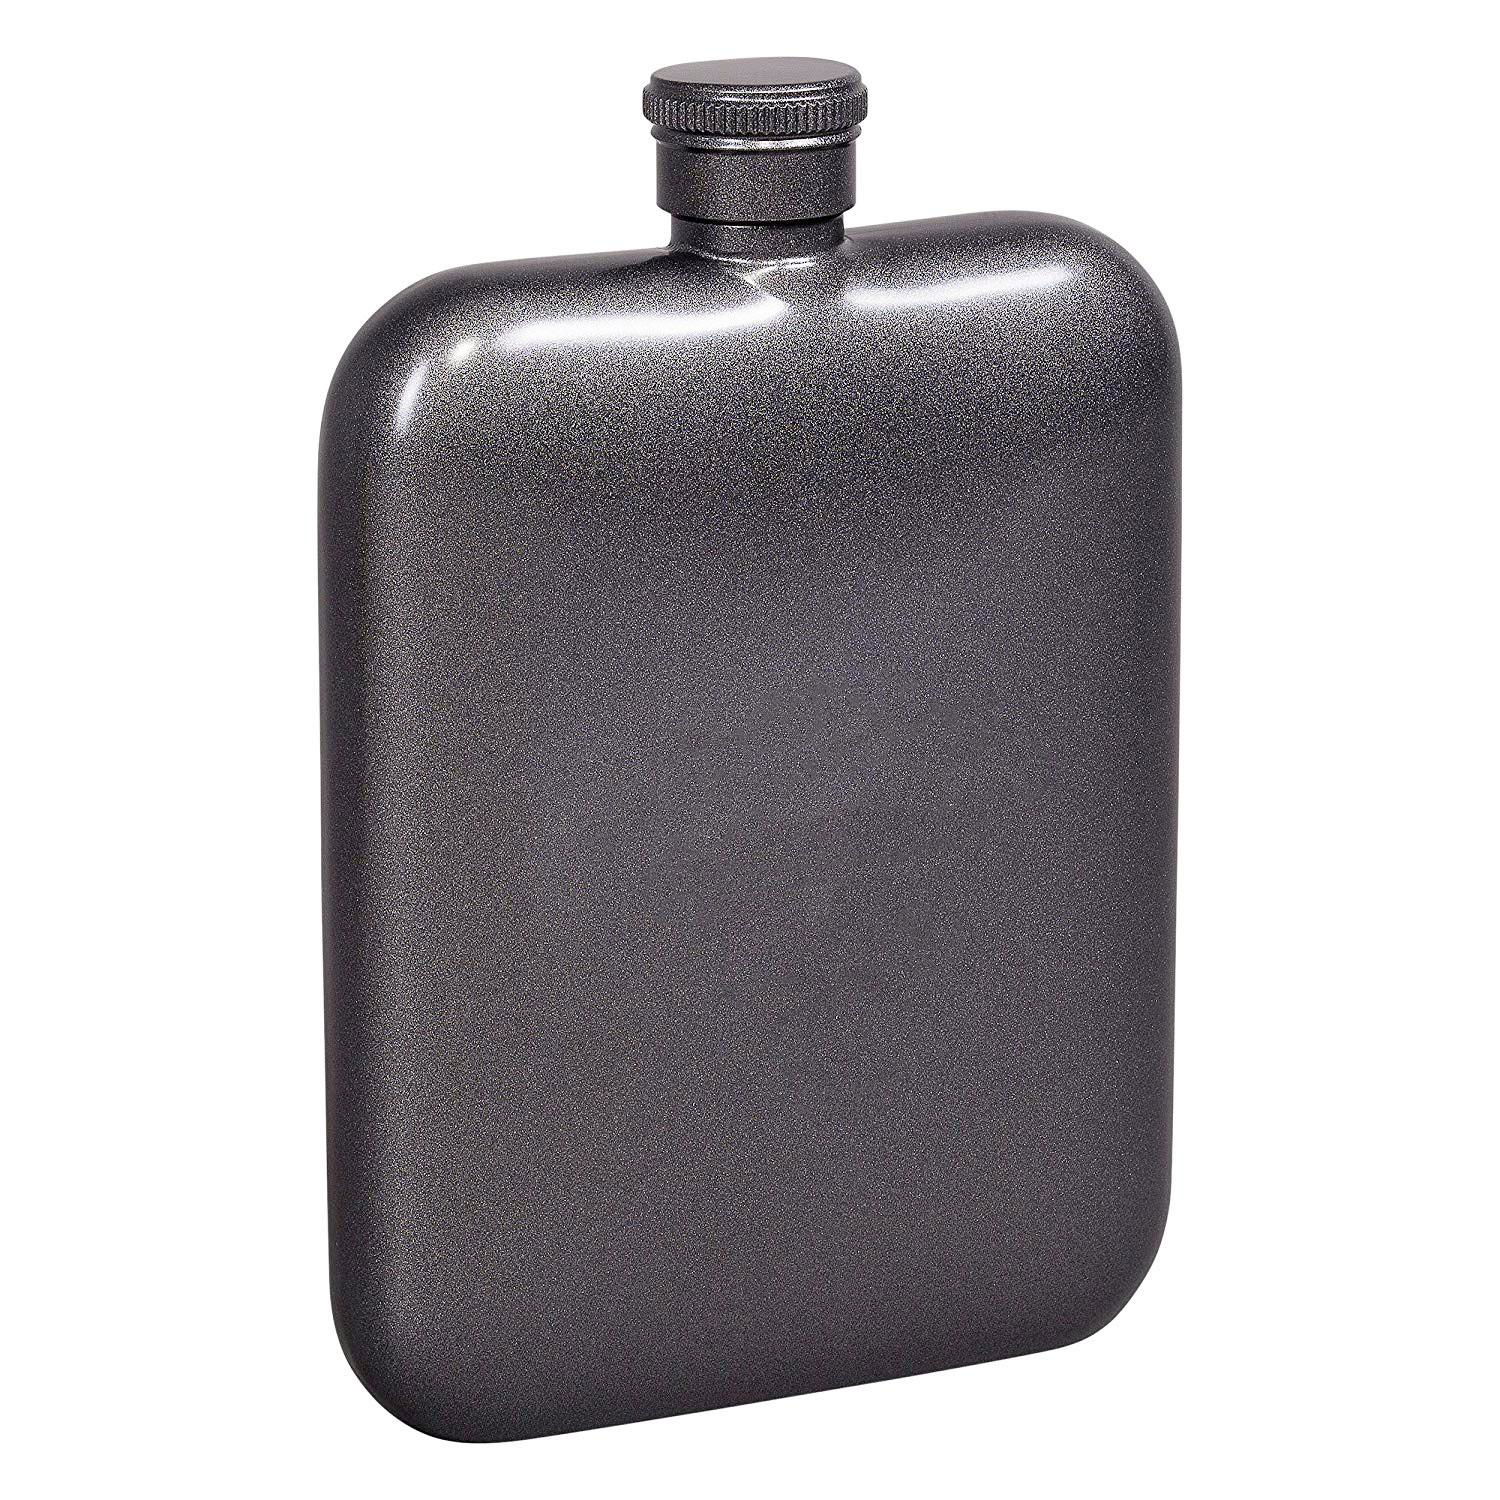 6 oz stainless steel hip flask  5